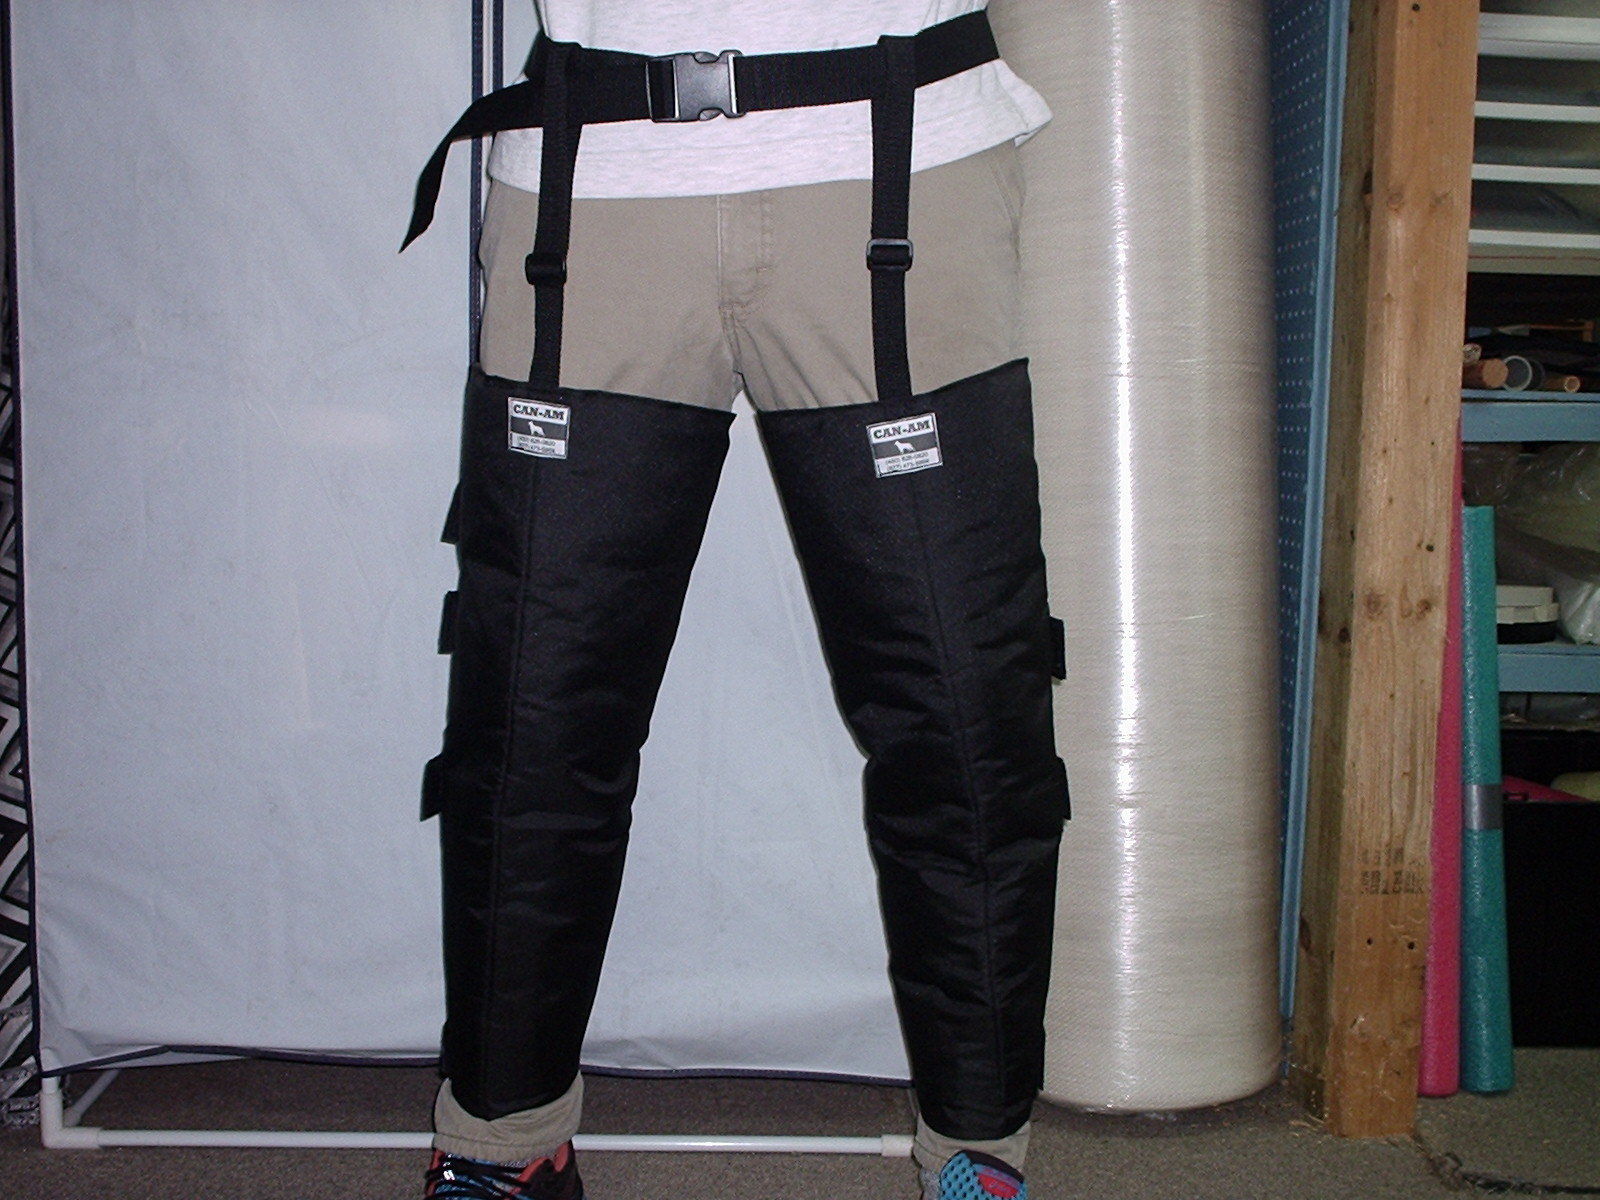 FULL LENGHT PANT INSERTS EXTRA PROTECTION POLICE K9 SCHUTZHUND - $110.64